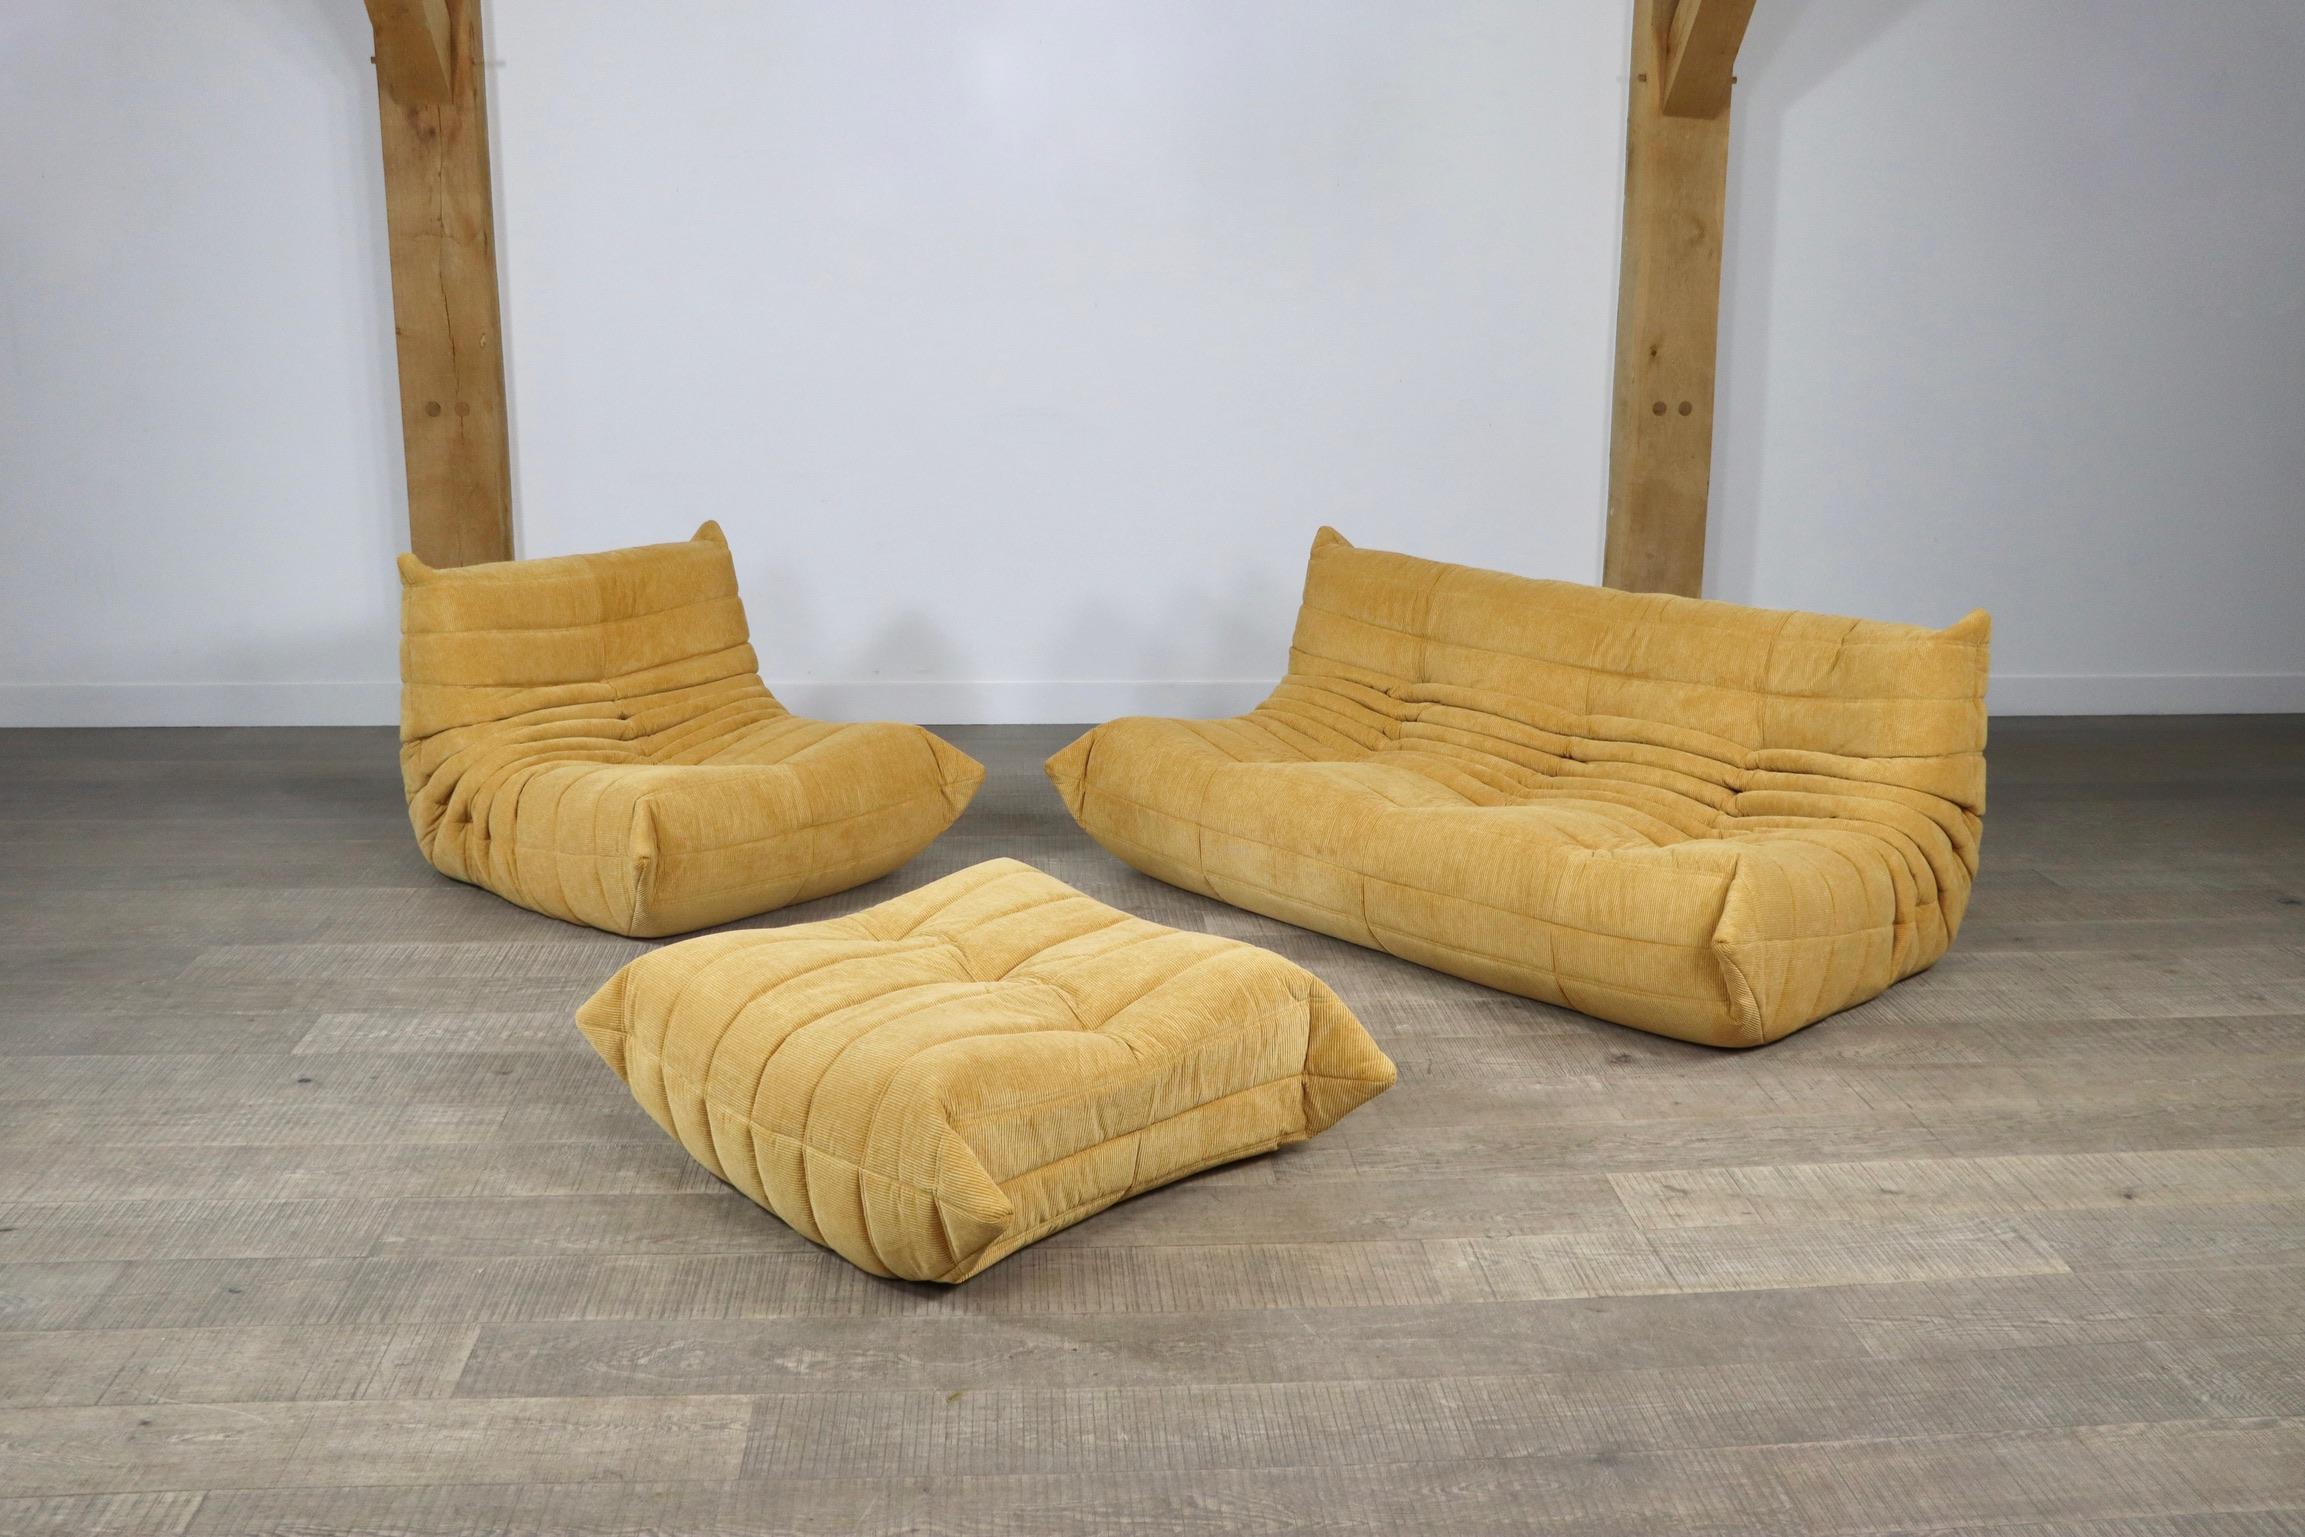 Beautiful mustard corduroy Togo seating group by Michel Ducaroy for Ligne Roset, 1970s. The entire seating group has the original Ligne Roset logo. The set consists of a 3-seater, a lounge chair and ottoman. The beautiful fabric and color combines